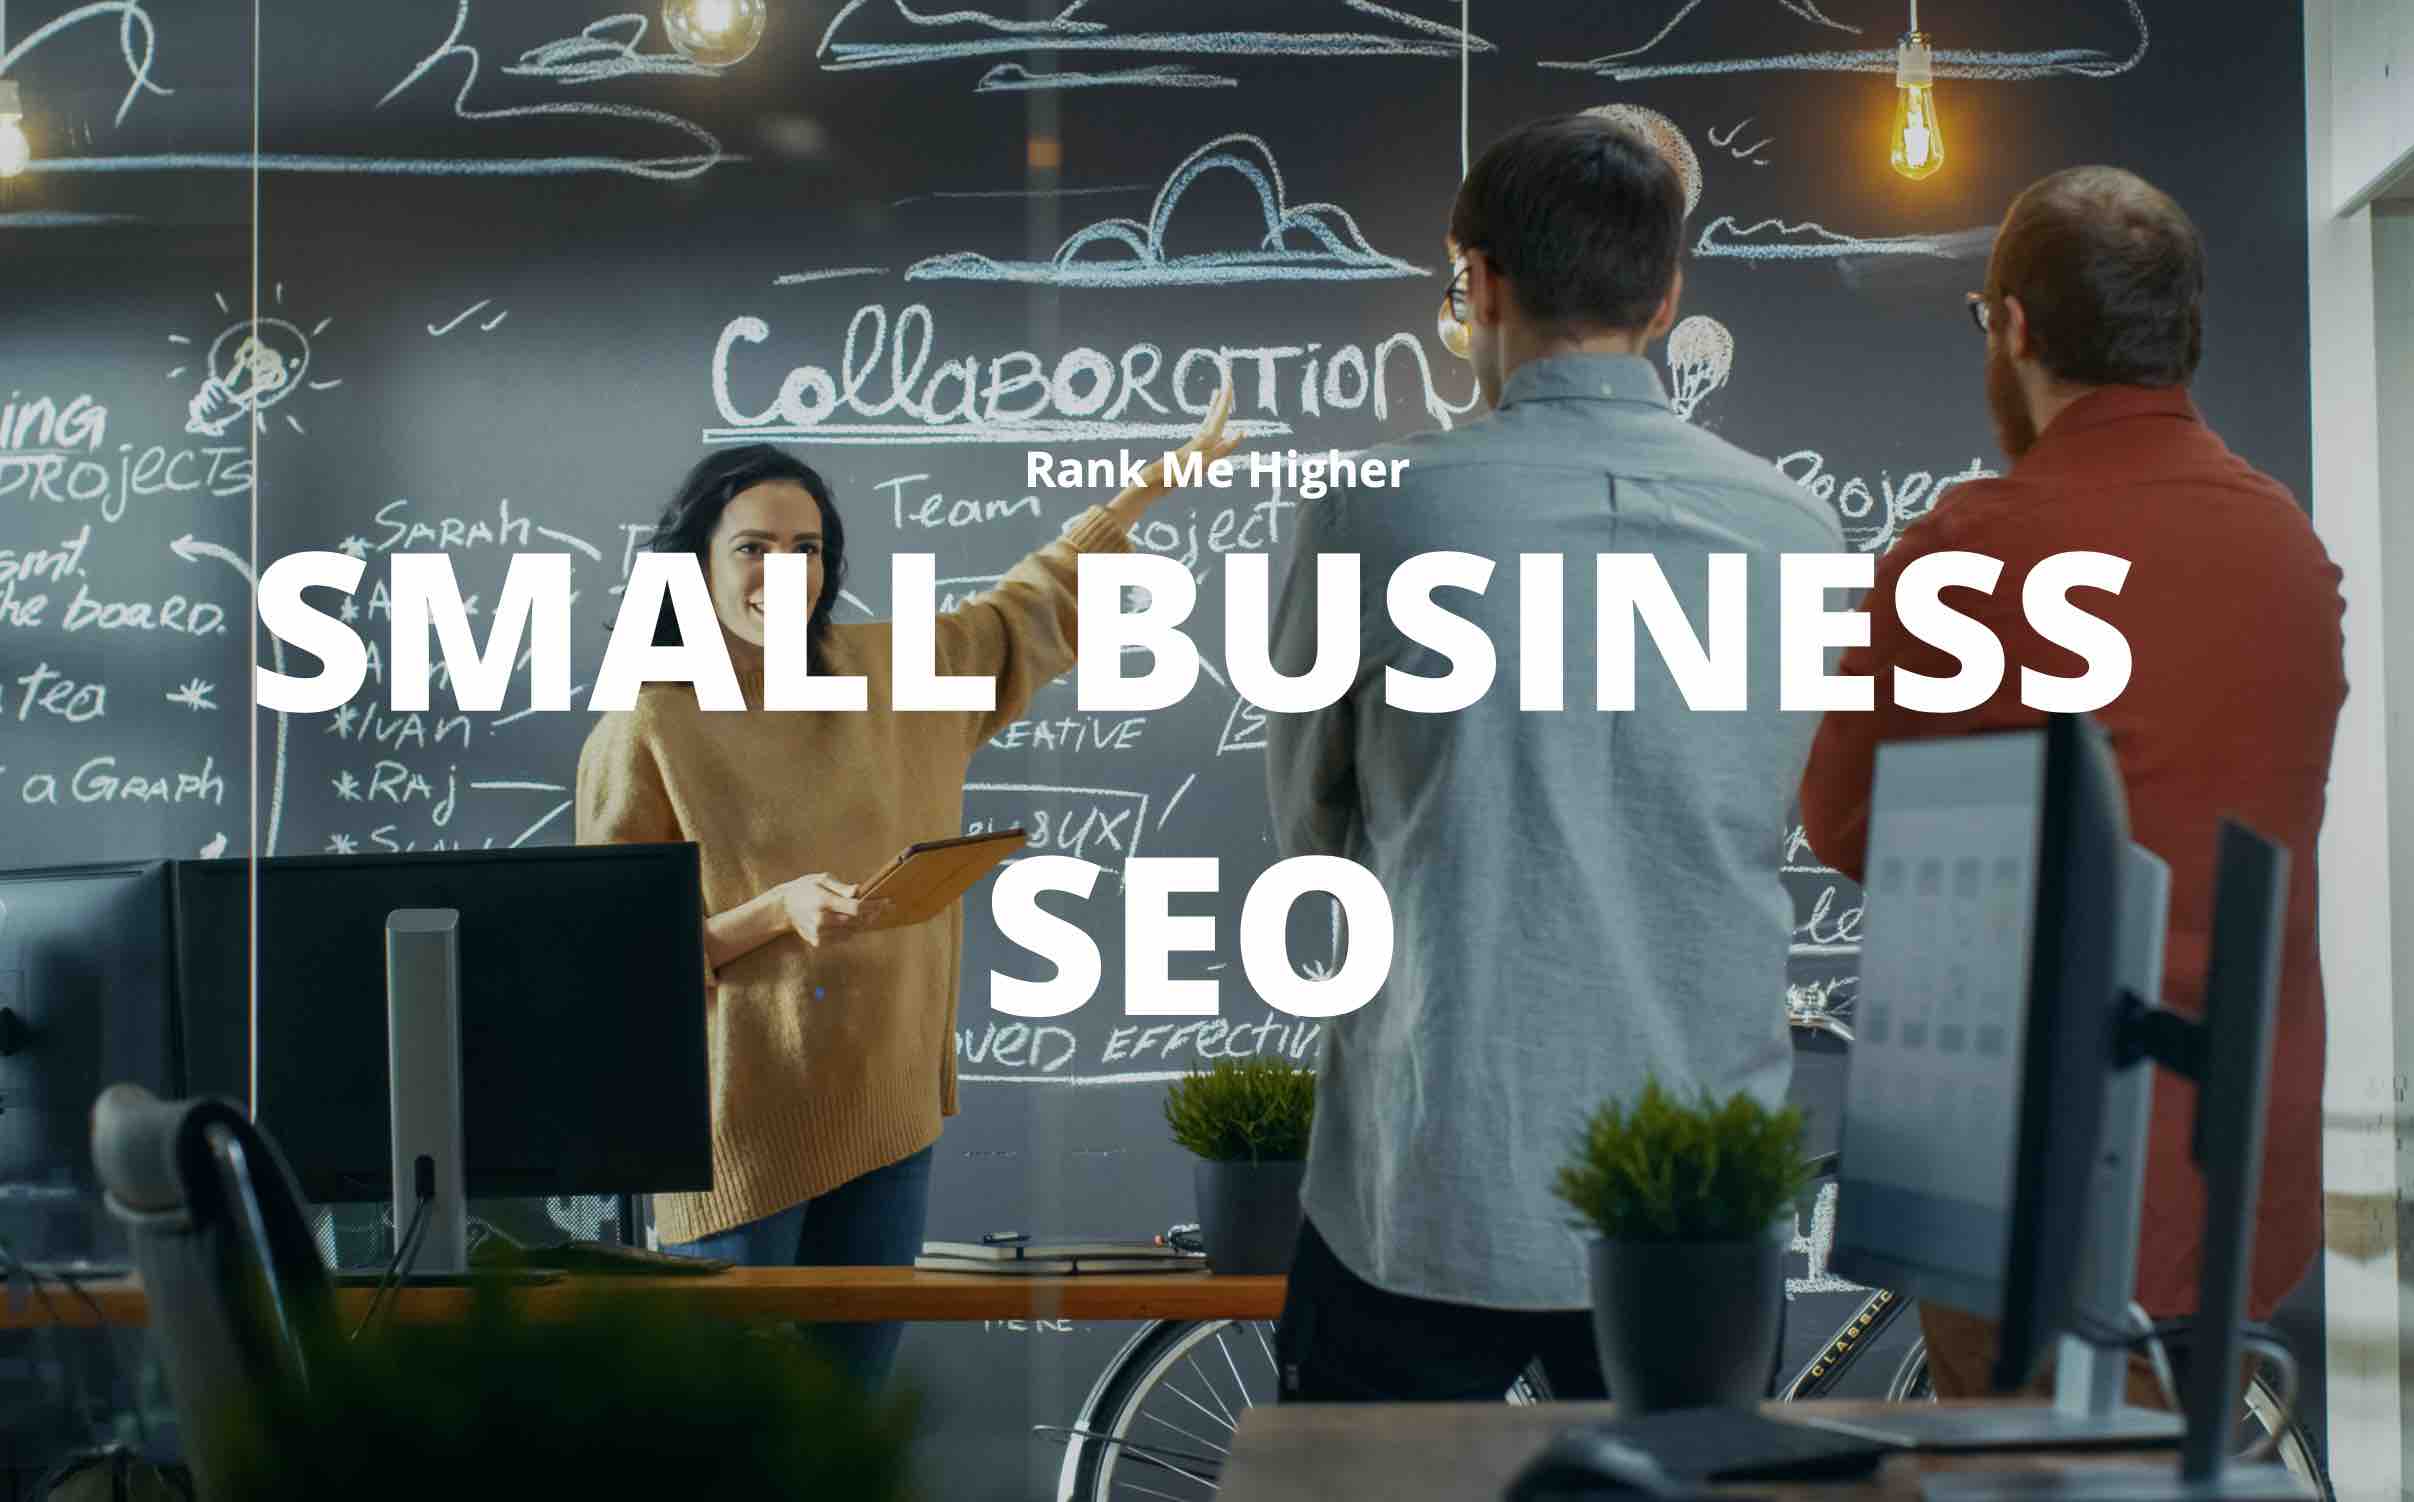 What are the qualities of a good SEO company?